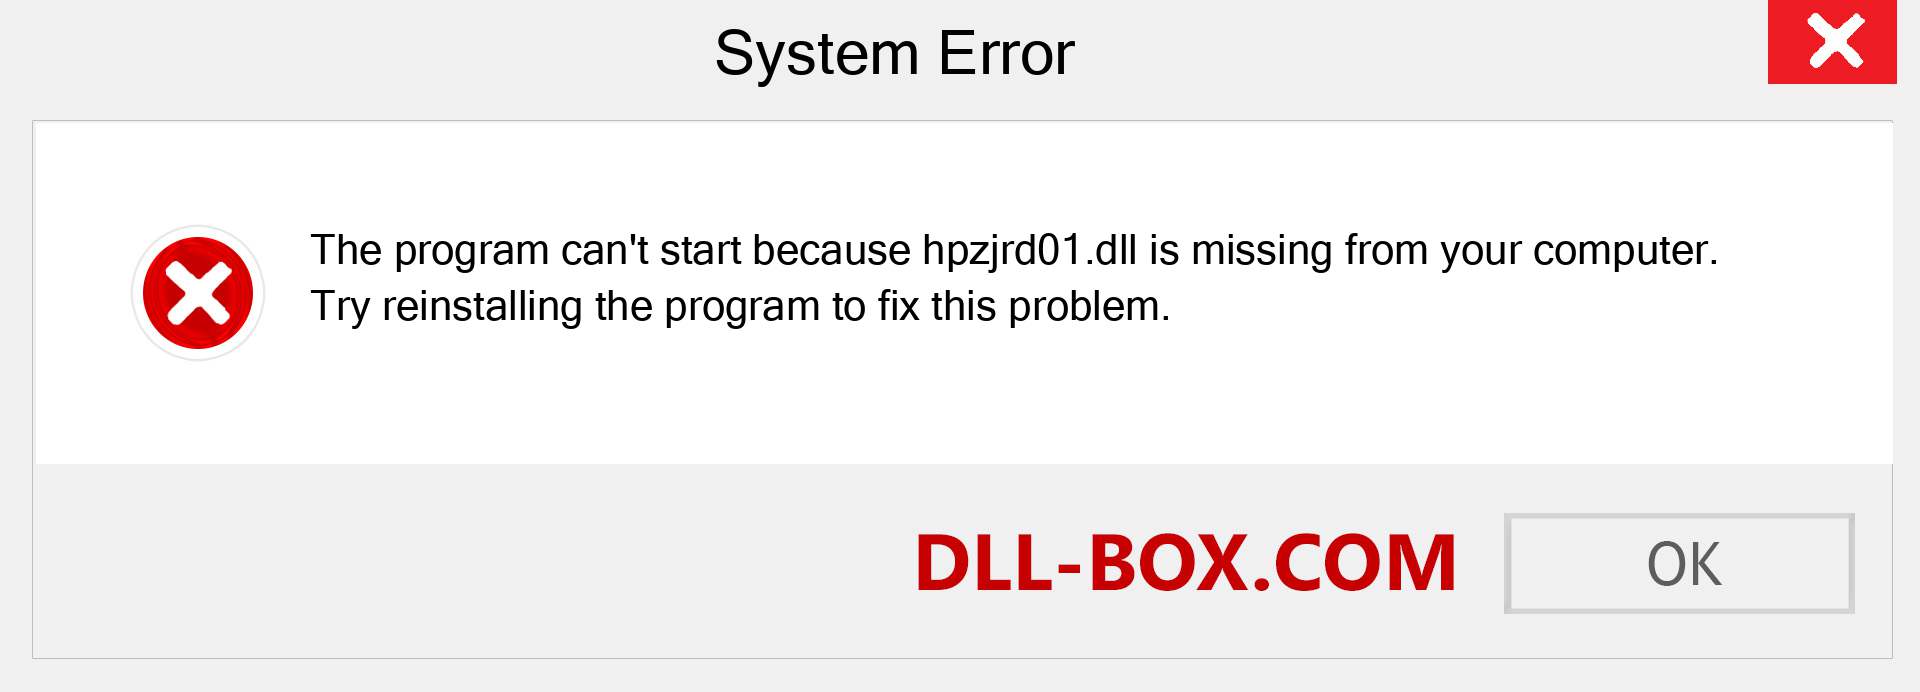  hpzjrd01.dll file is missing?. Download for Windows 7, 8, 10 - Fix  hpzjrd01 dll Missing Error on Windows, photos, images